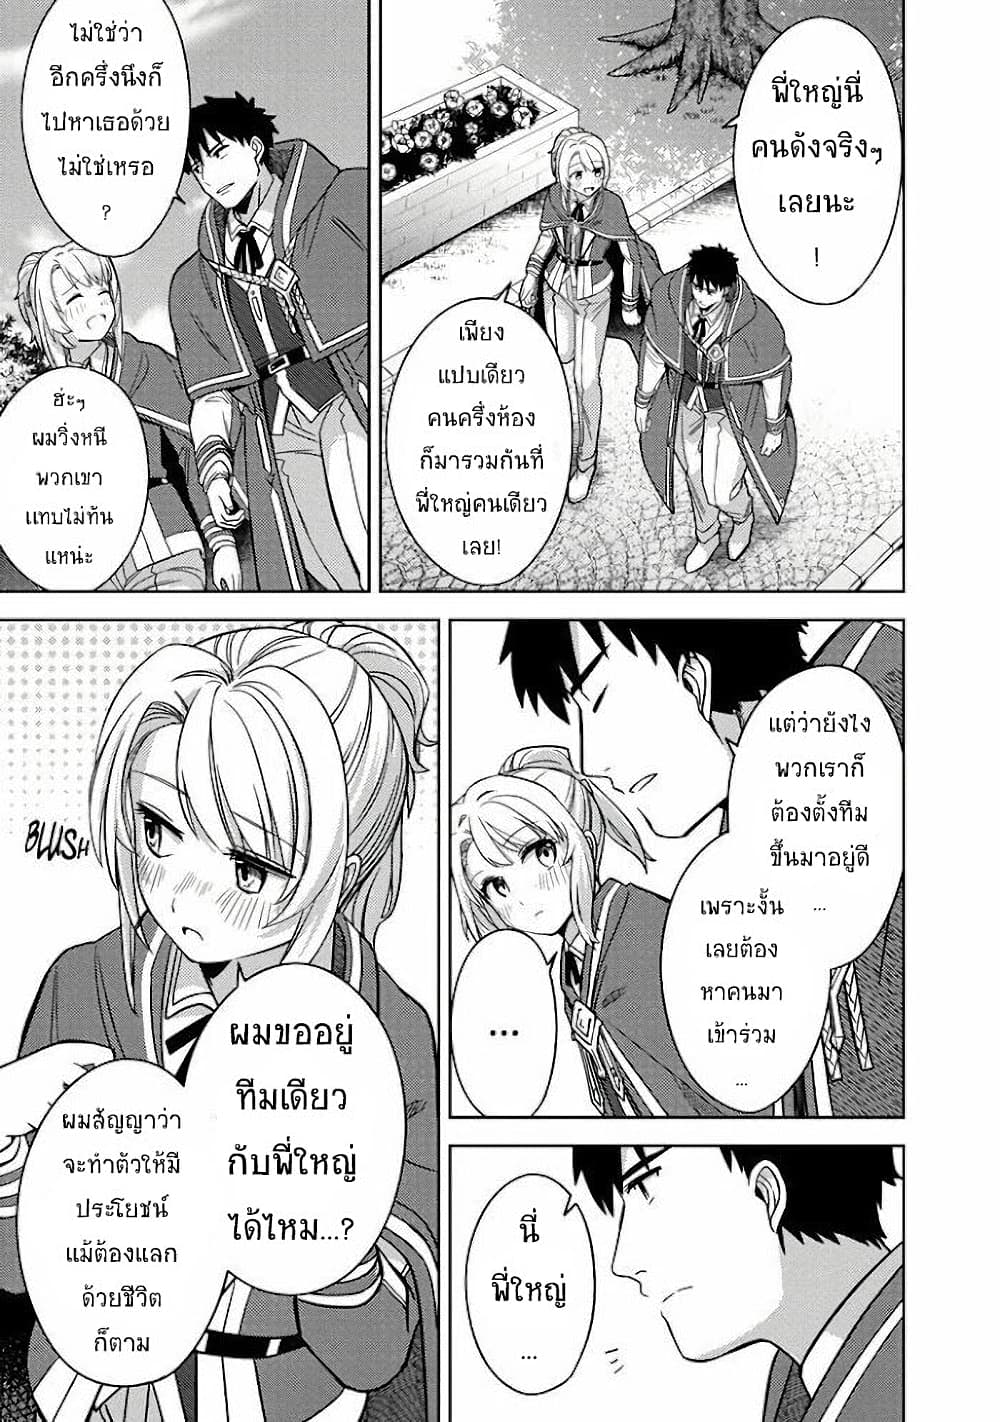 The Reincarnated Swordsman With 9999 Strength Wants to Become a Magician! ตอนที่ 5 (5)